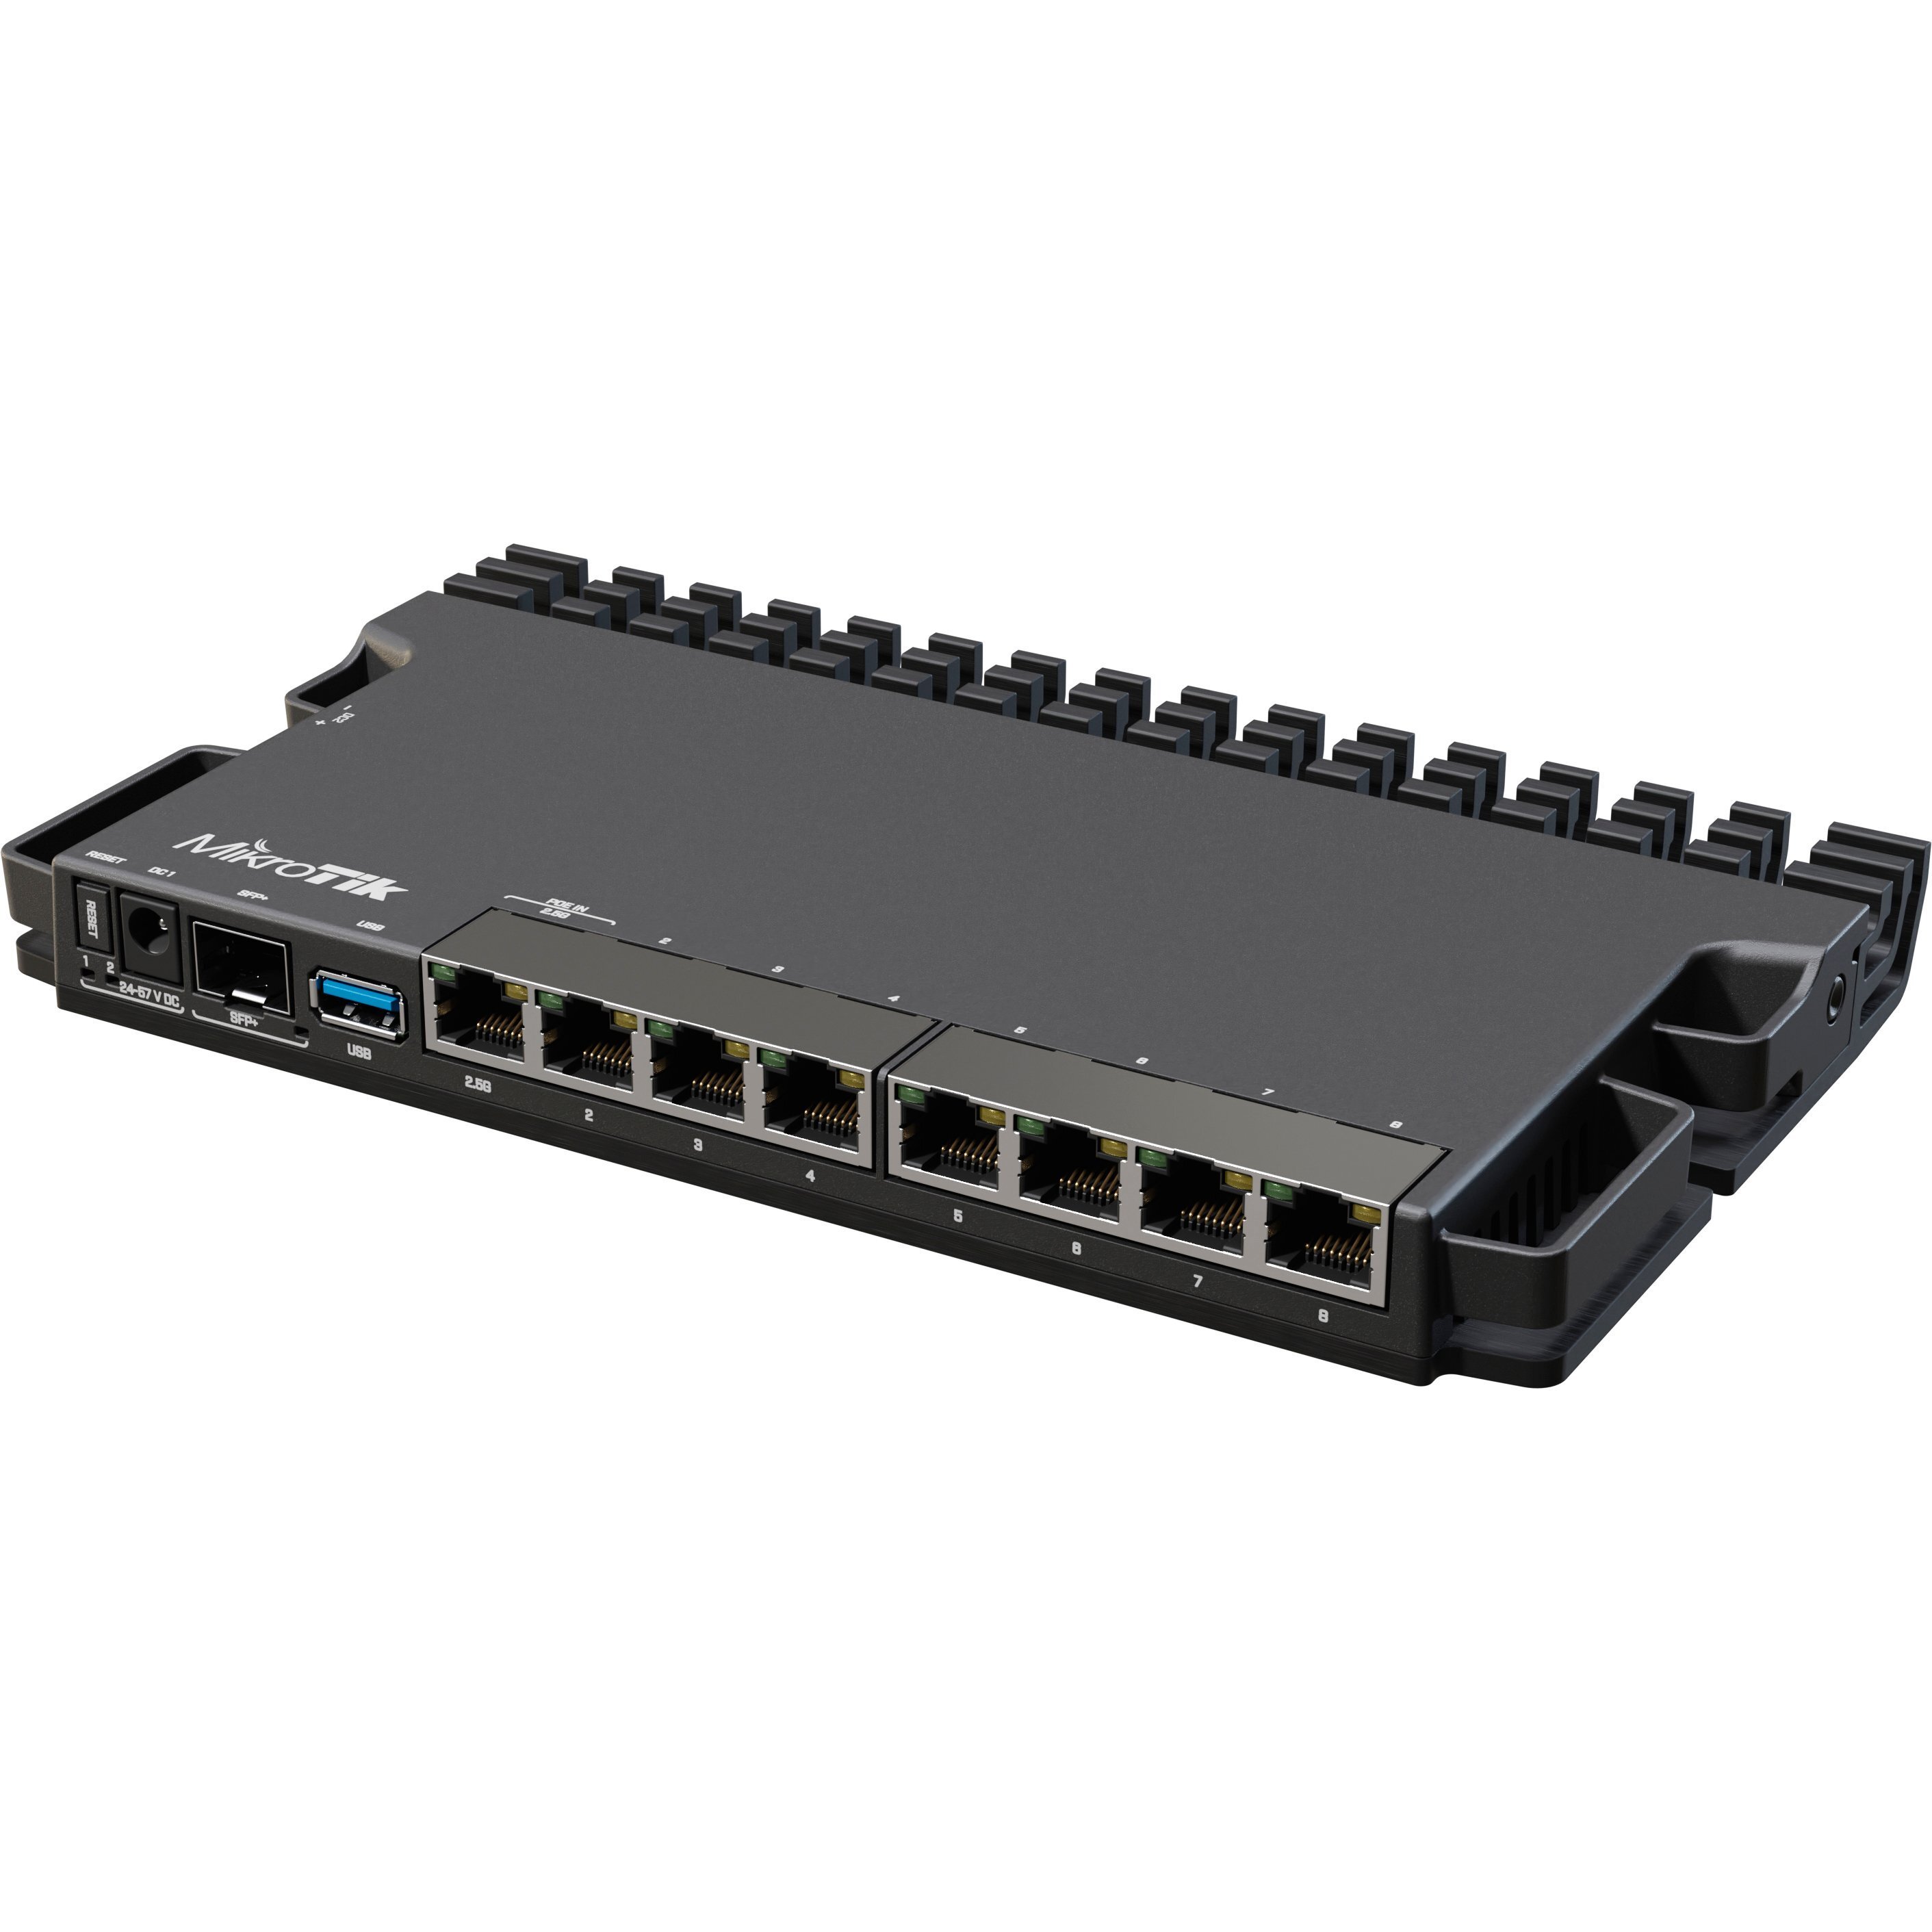 Маршрутизатор MikroTik RouterBOARD RB5009UG+S+IN (RB5009UG+S+IN) фото 1